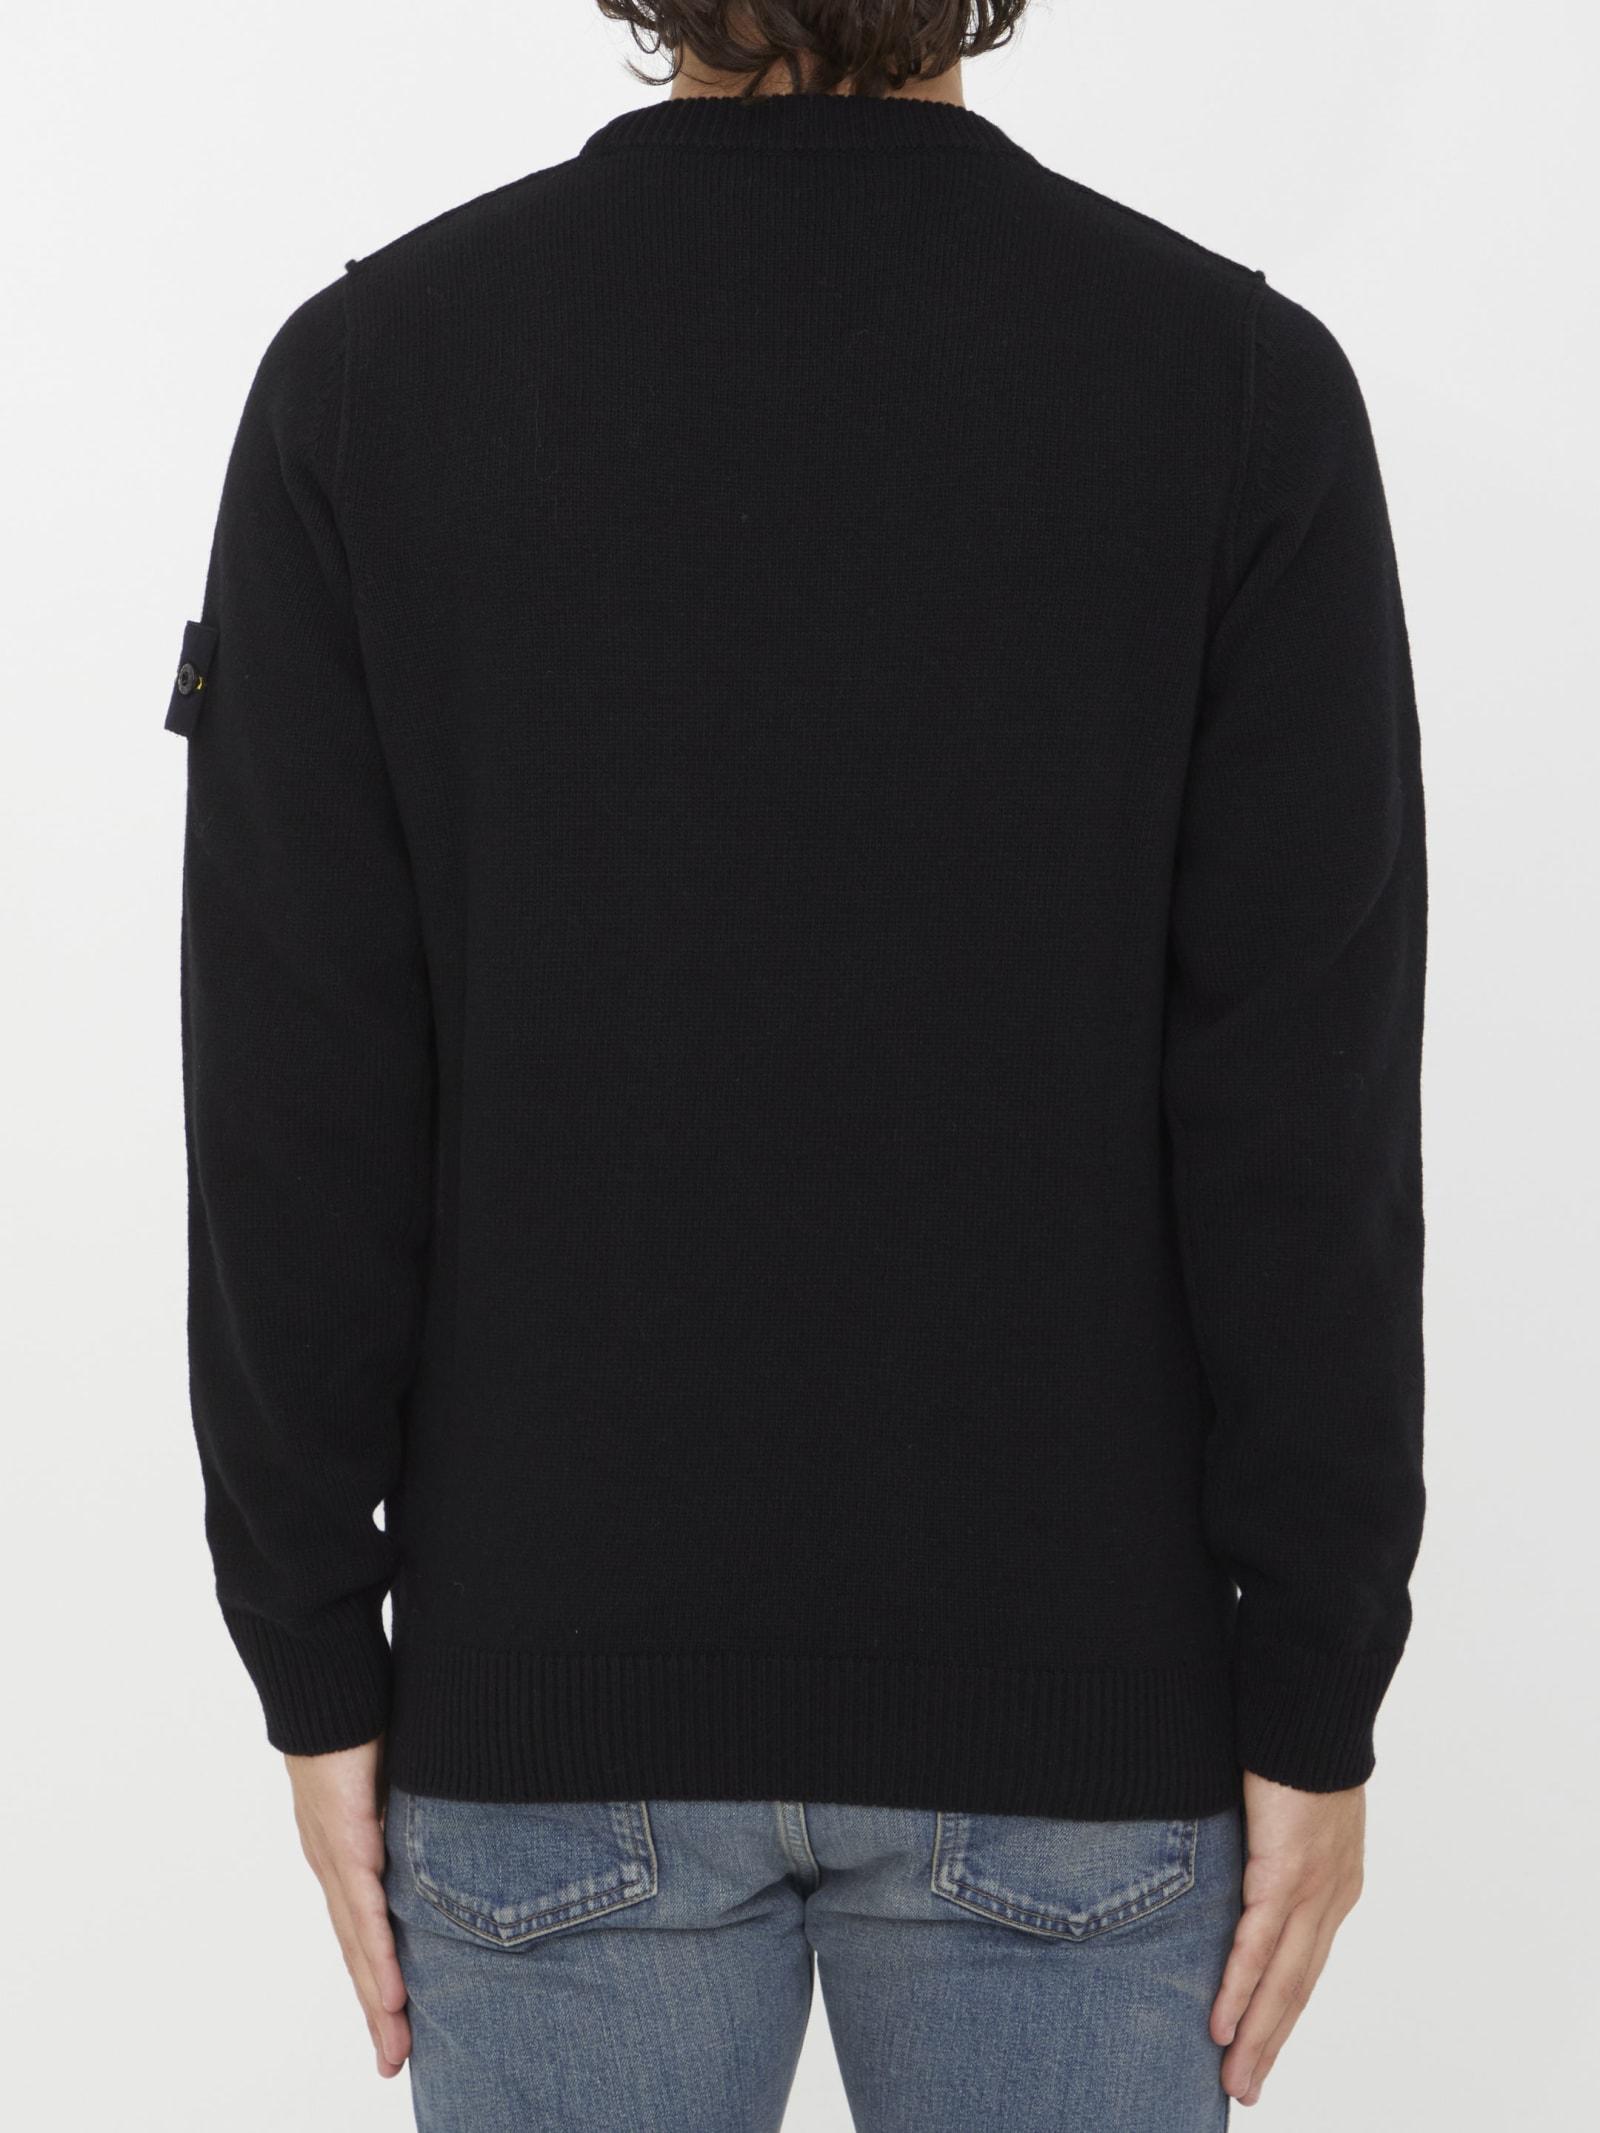 Stone Island Sweatshirt With Compass Application in Black for Men | Lyst